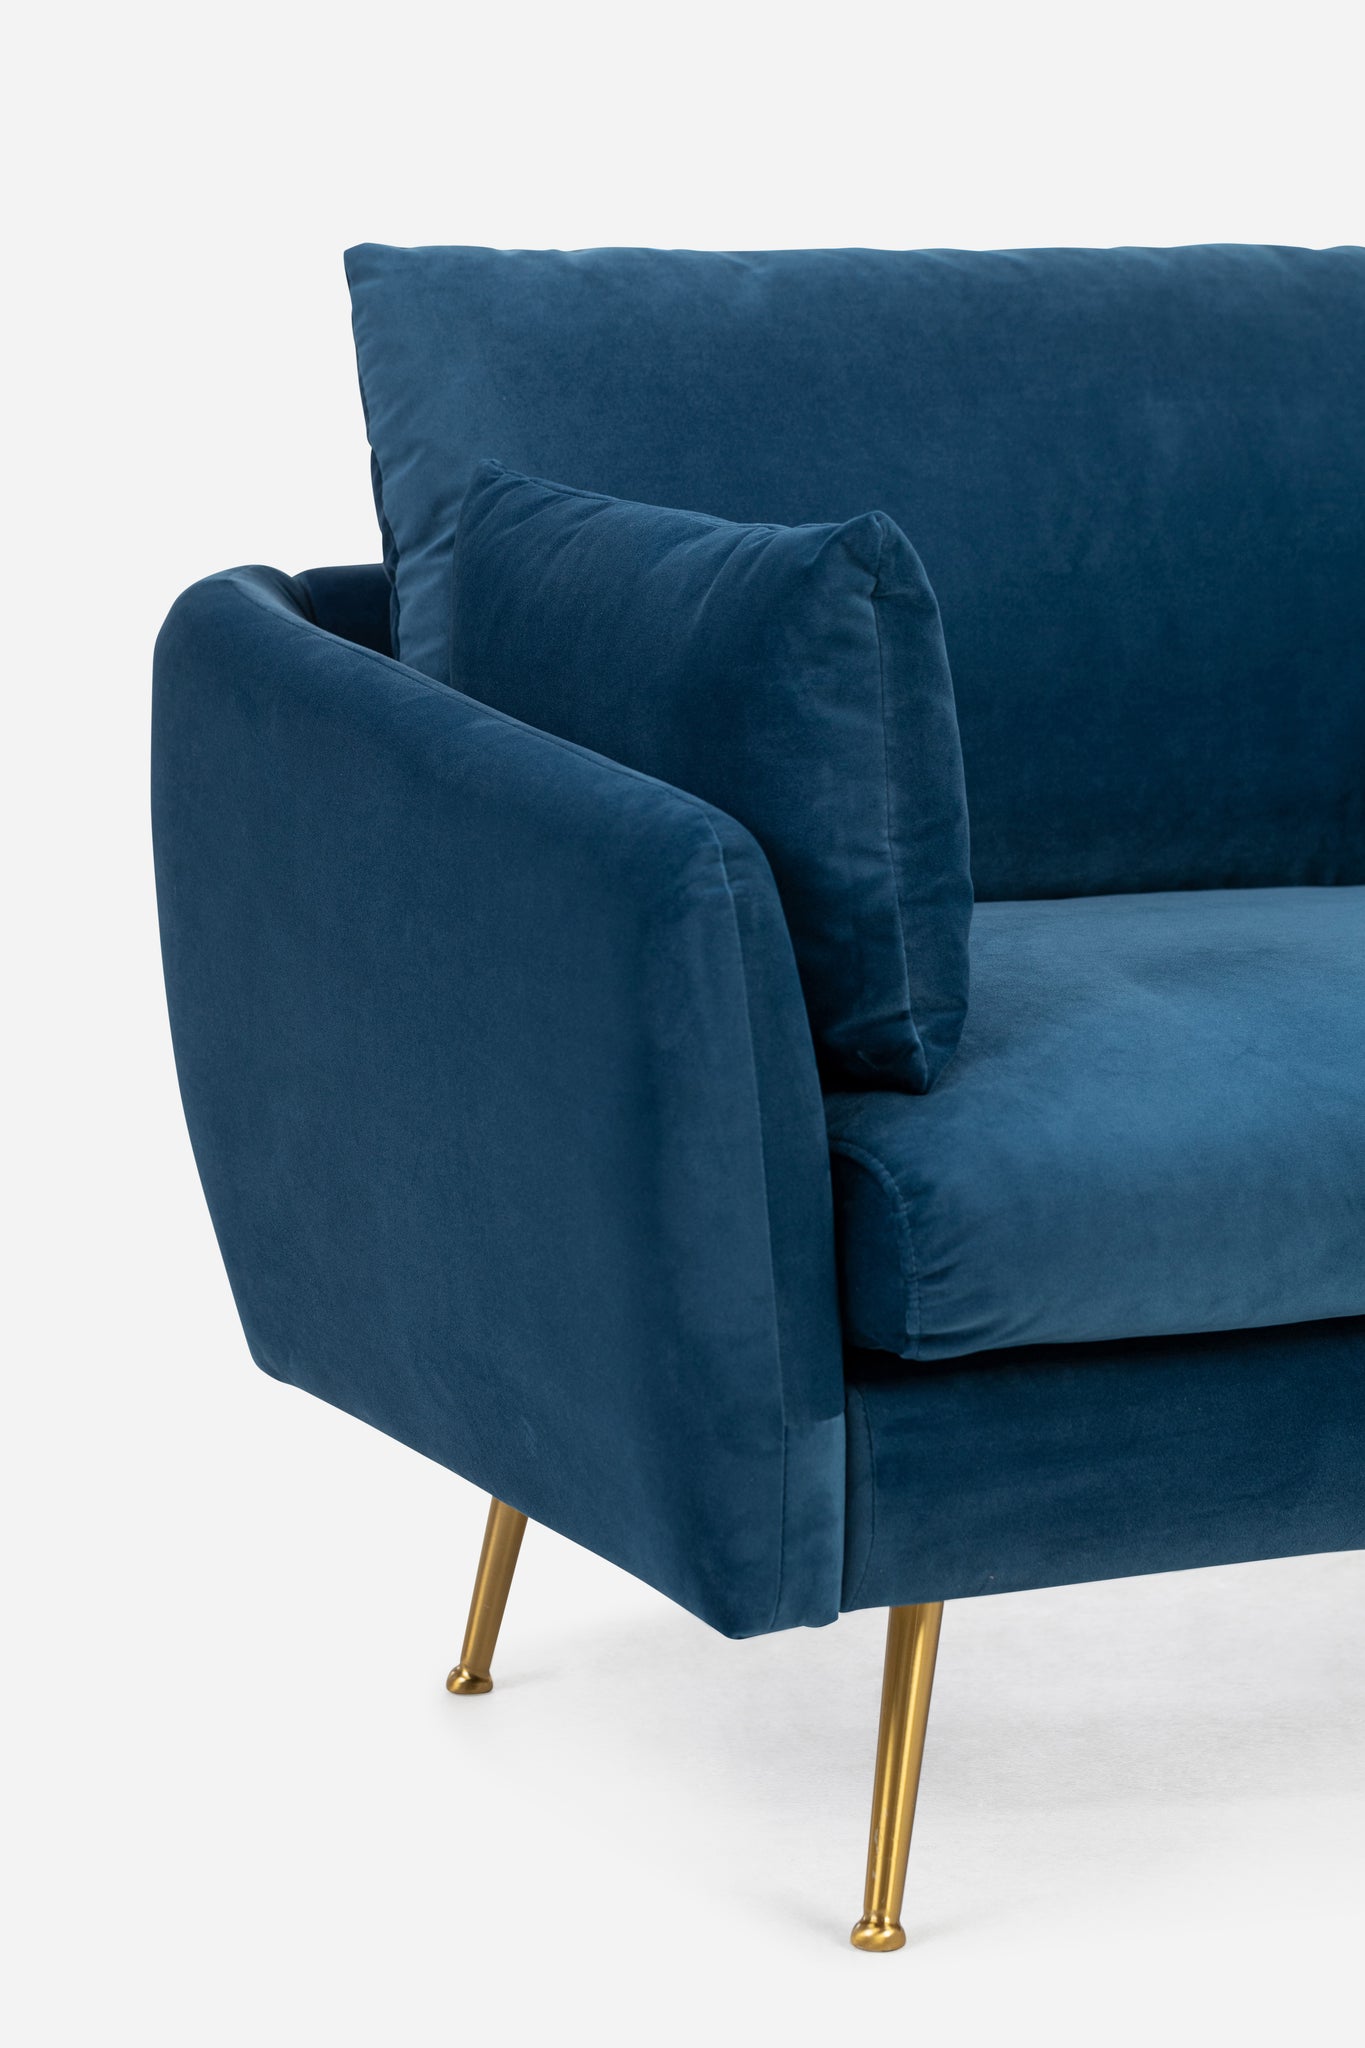 park sectional sofa shown in blue velvet with gold legs right facing